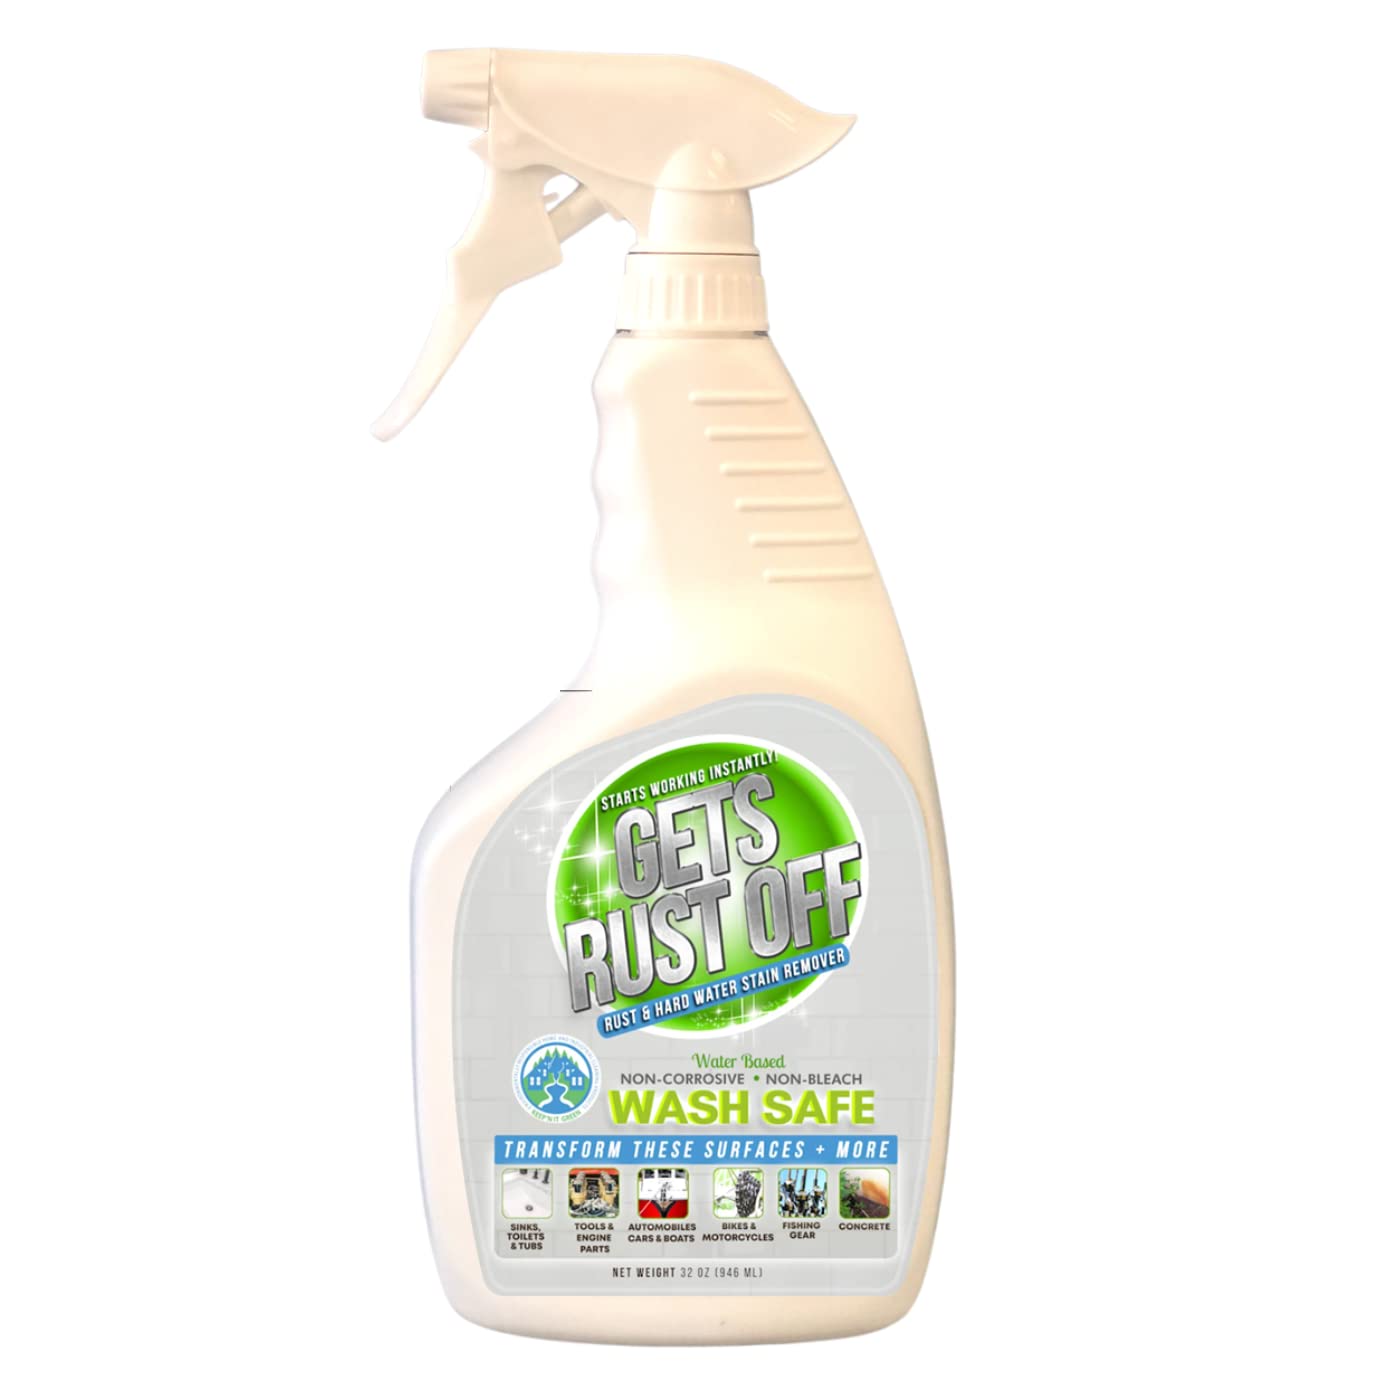 WS-RO-32 Clear Rust Off Rust and Hard Water Stain Remover, 32 oz. Spray Bottle